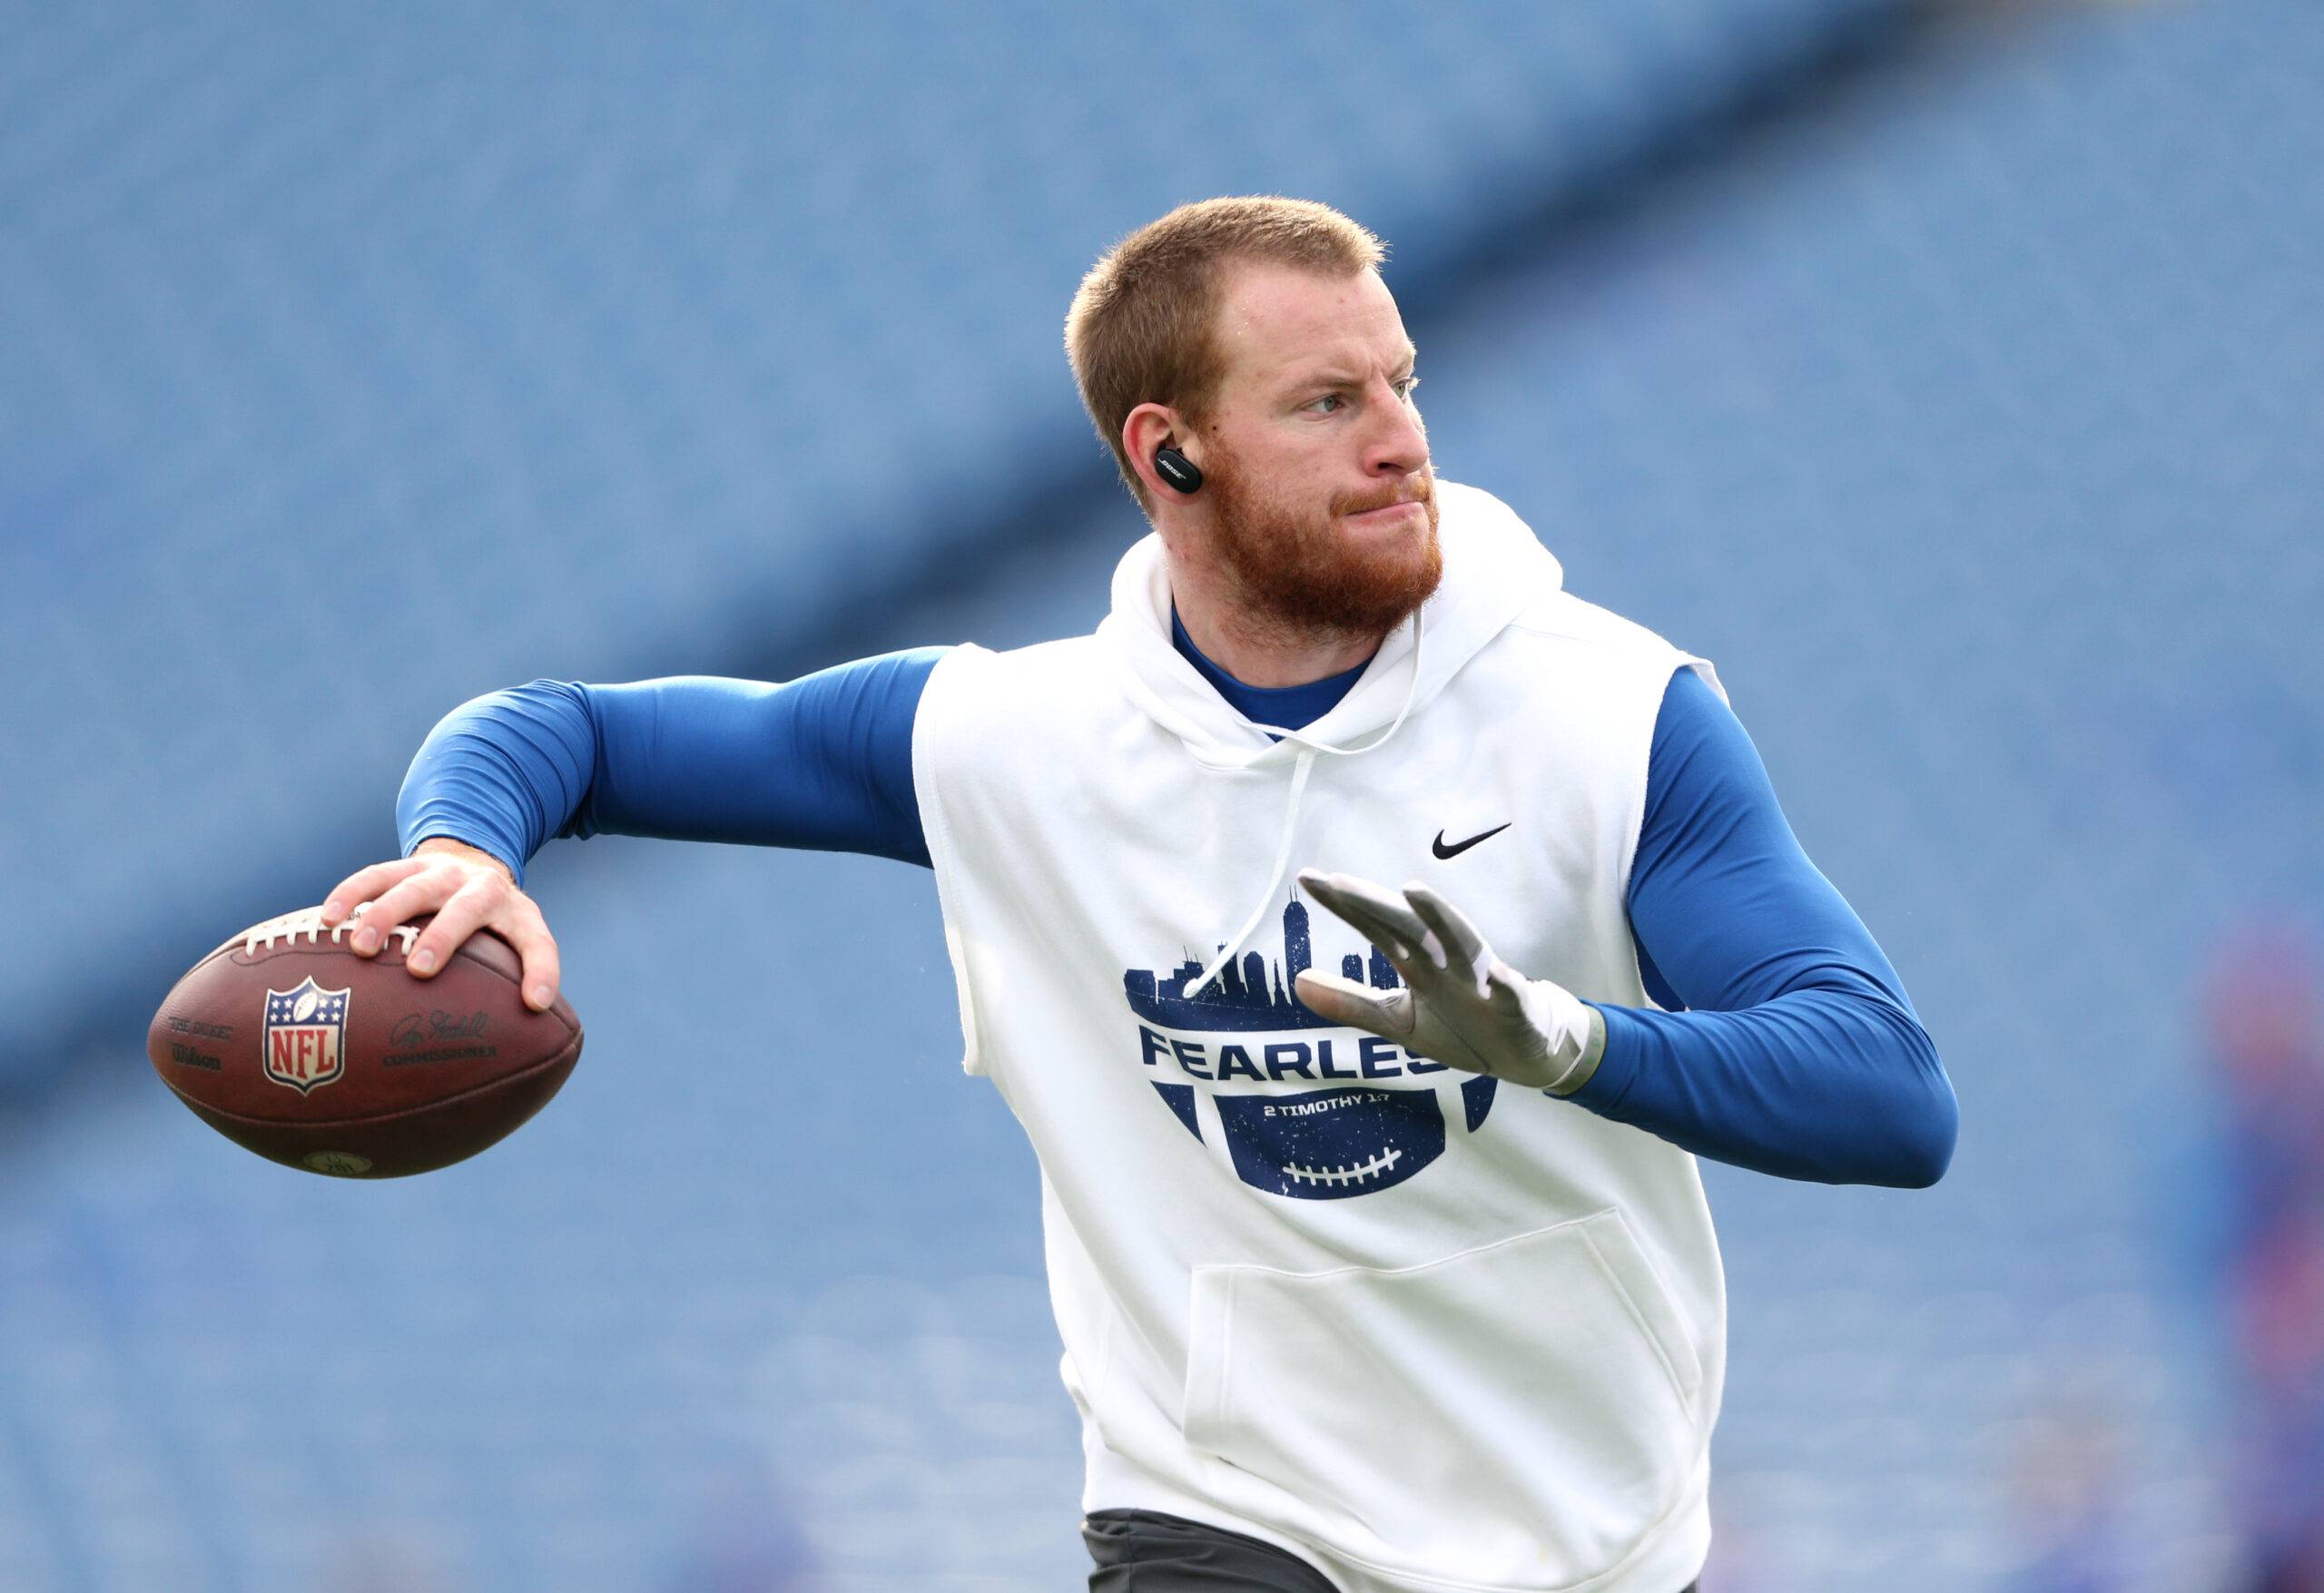 Carson Wentz of the Indianapolis Colts